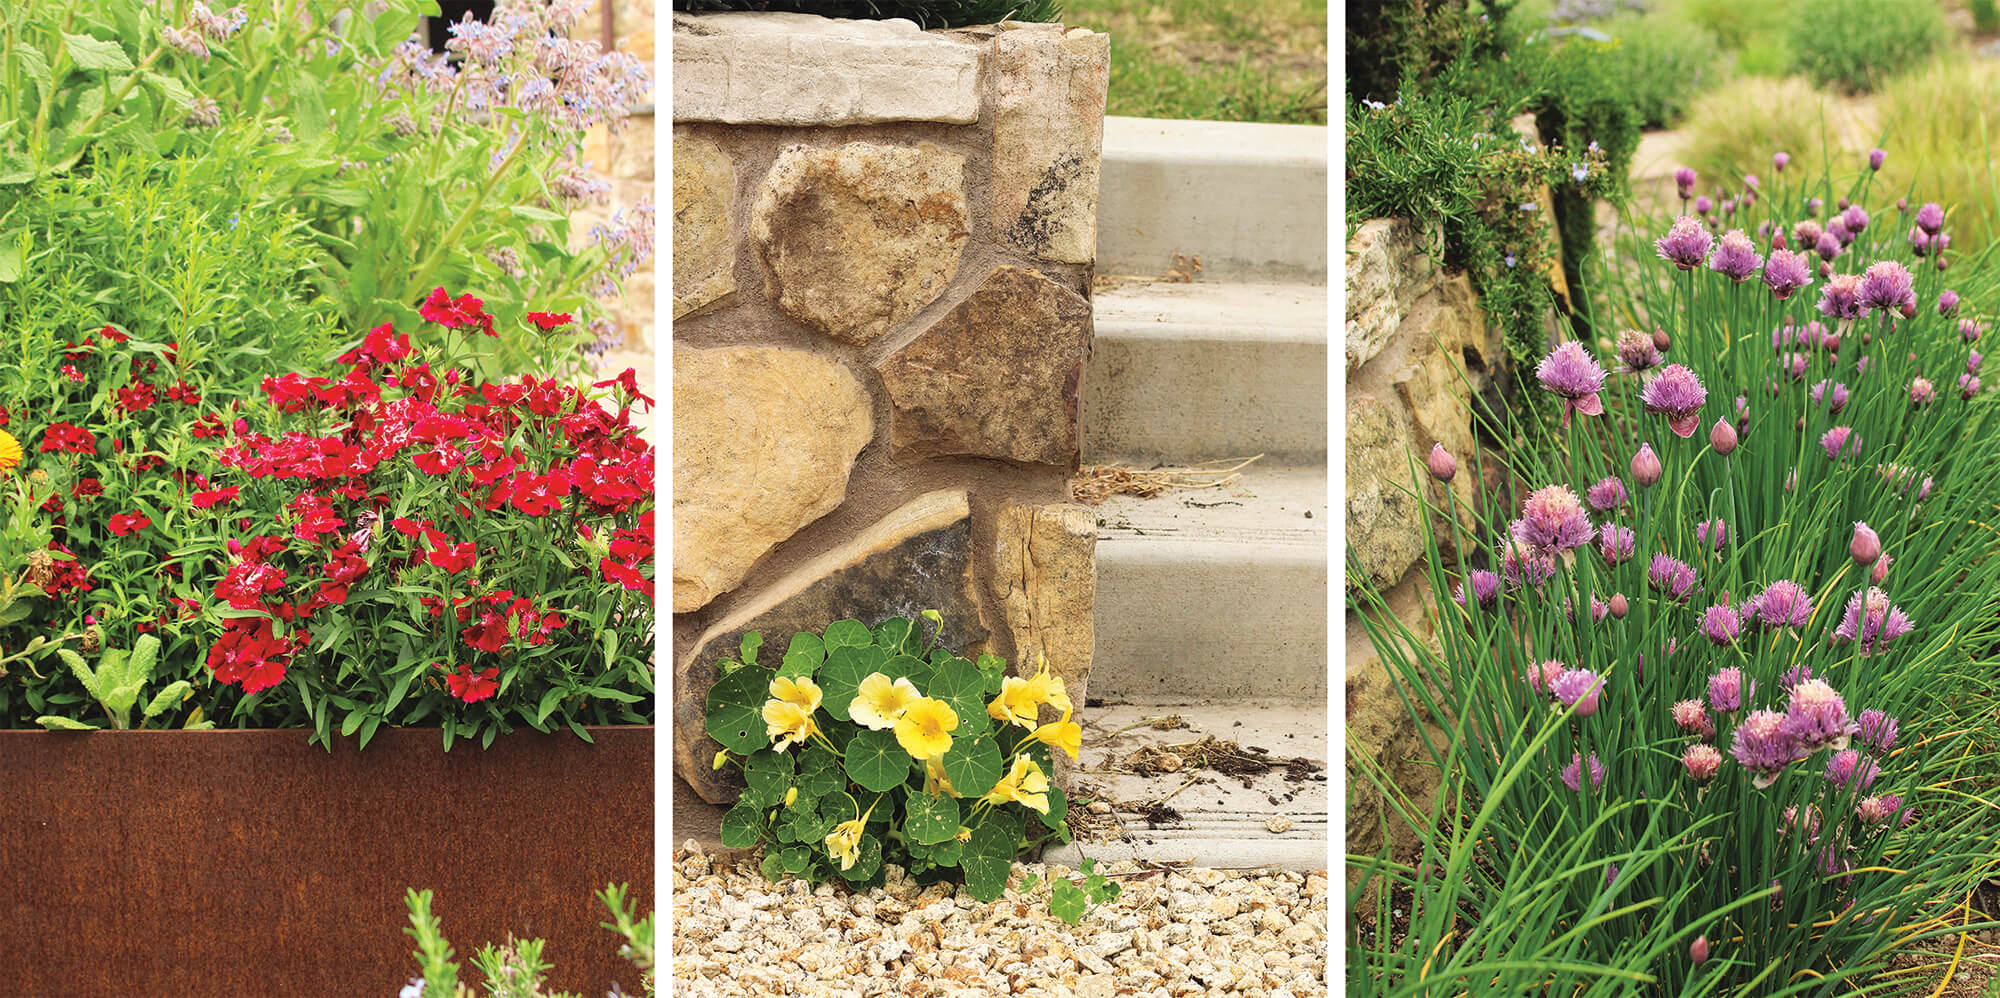 Edible flowers in a variety of colors including red, yellow and purple in our flower beds